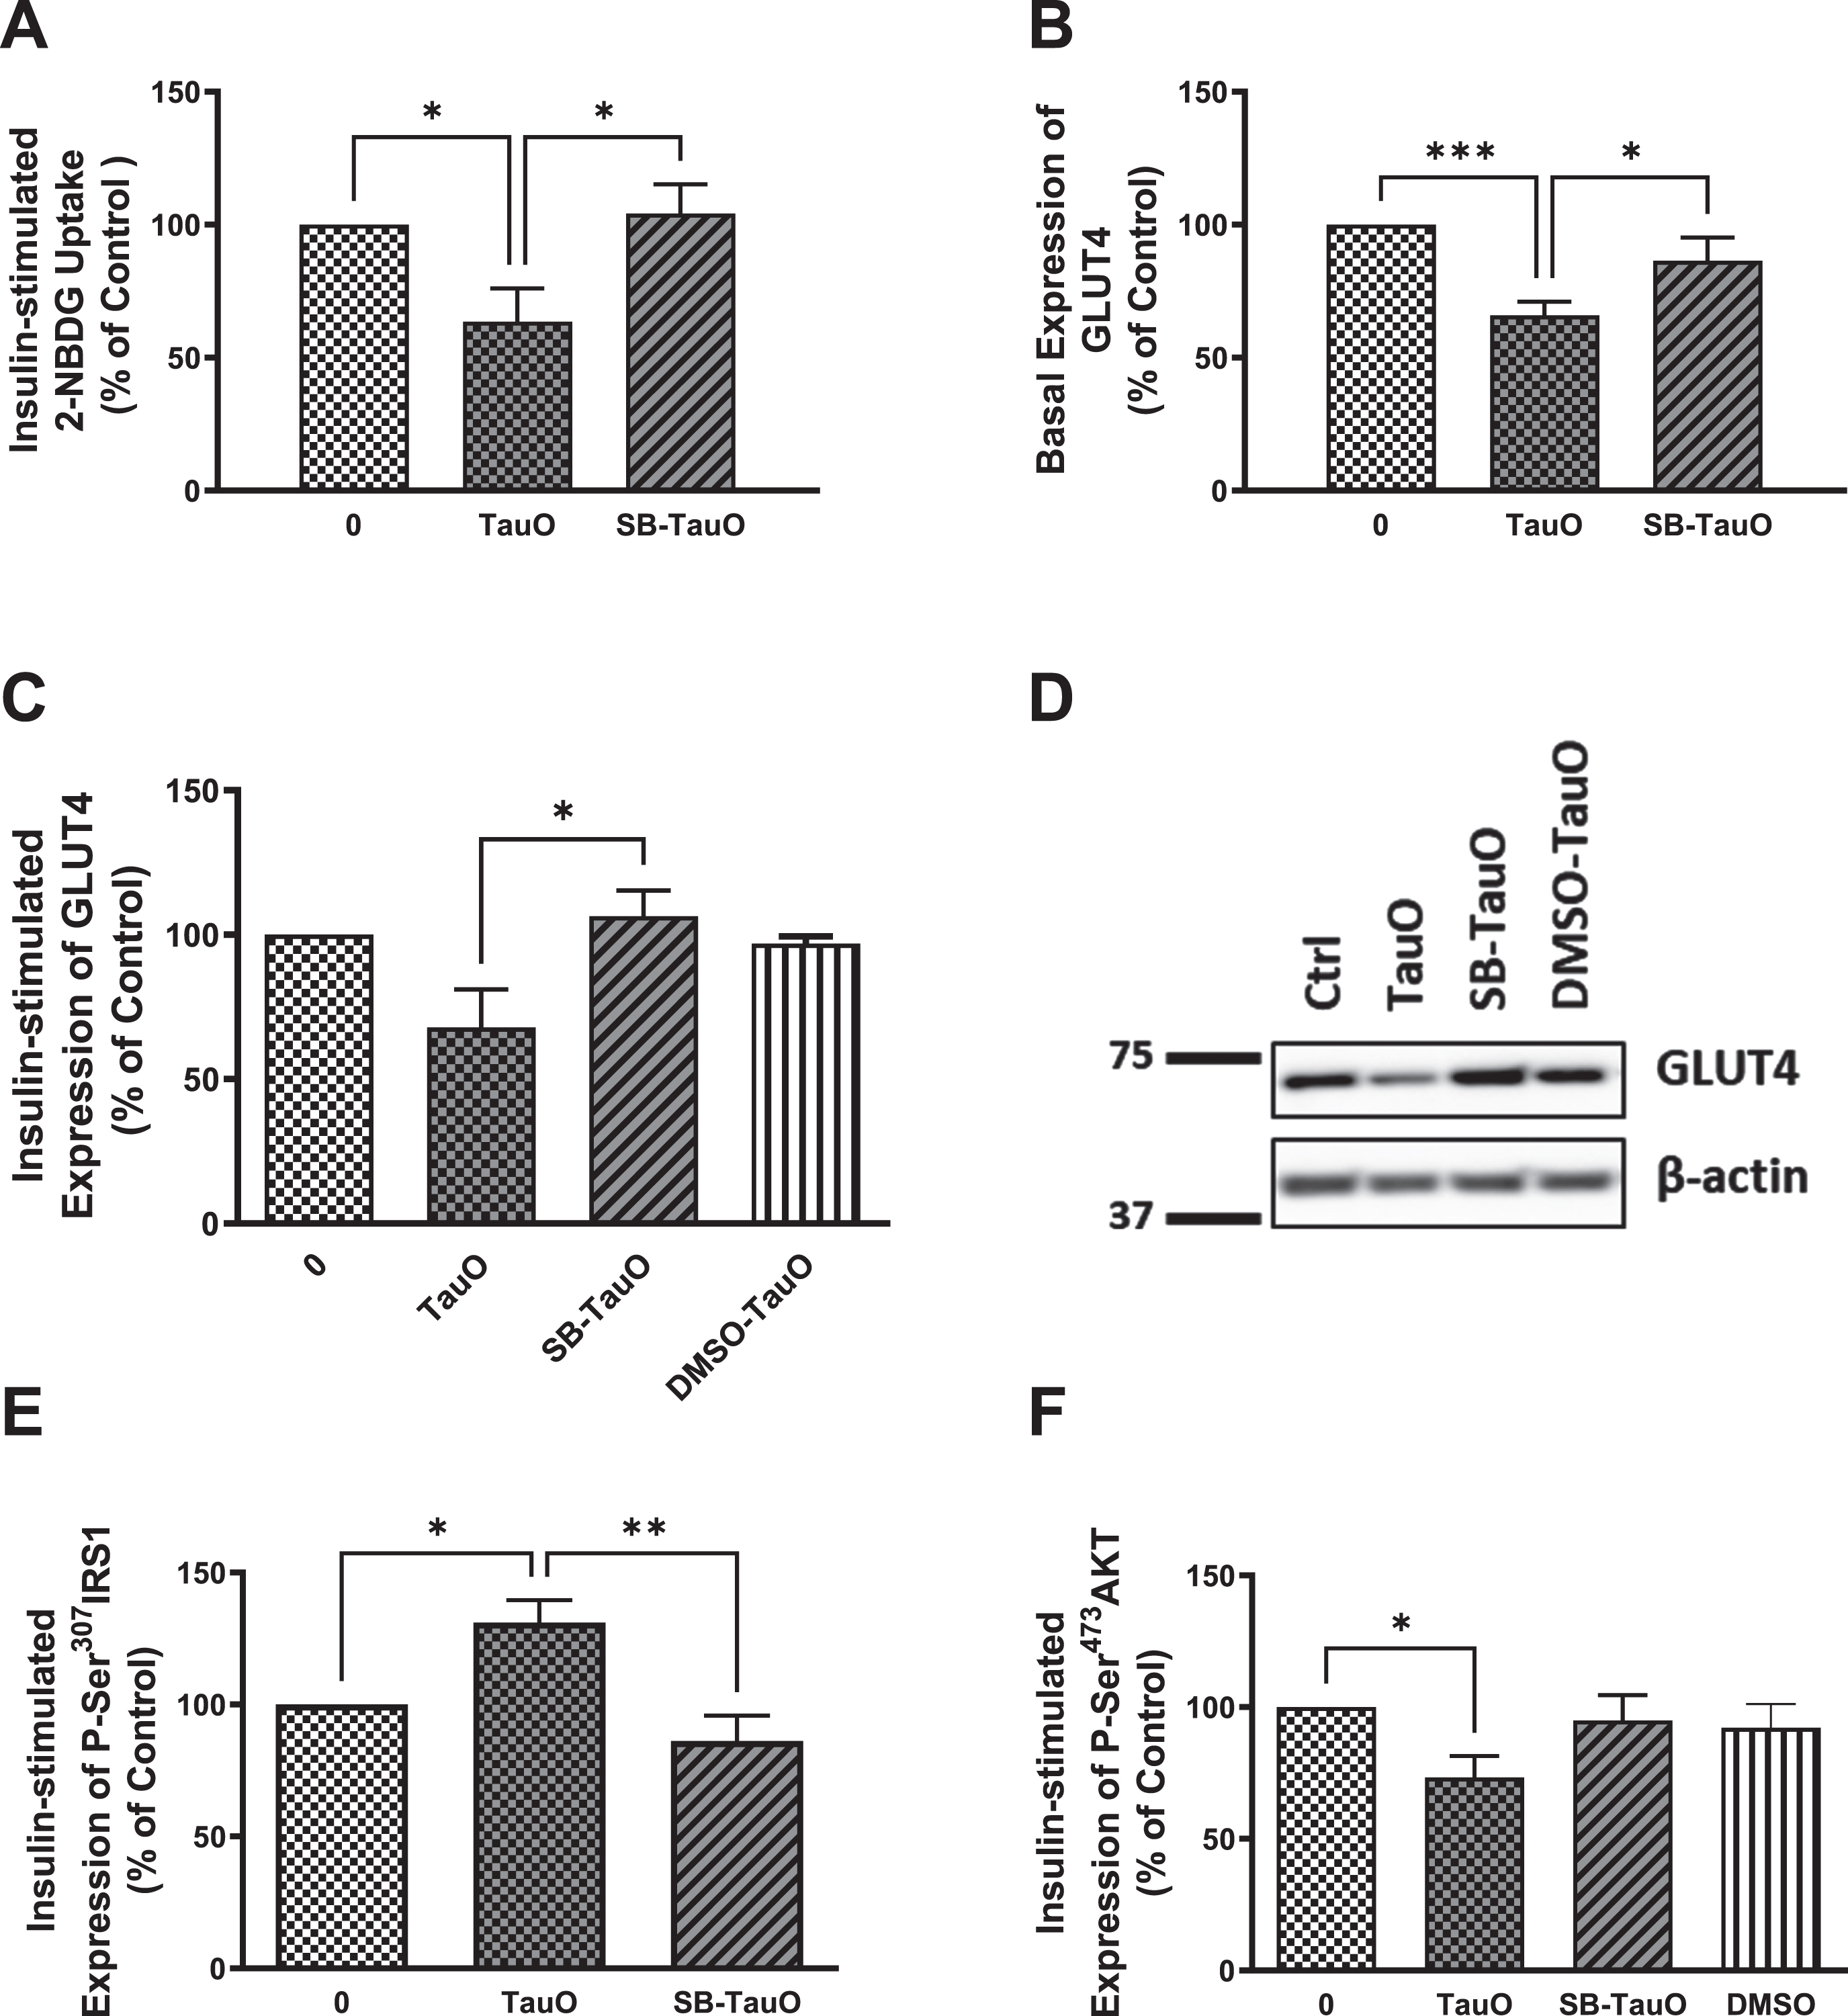 Exposure to the p38 MAPK inhibitor, SB203580, rescues TauO-induced downregulation of insulin signaling. Glucose-uptake: A) Treatment with 0.5μM TauO results in significant reduction of insulin-stimulated glucose uptake into primary wild type hepatocytes that is rescued by pretreatment with the p38 inhibitor, SB203580. Data represent mean±SEM of 7 (untreated, TauO treated) or 4 (SB-TauO-treated) mice. Western blot analysis: C, D) Pretreatment with SB203580 rescues TauO-induced reduction of insulin-stimulated expression of GLUT4 at the membrane in wild type primary mouse hepatocytes. Data represent mean±SEM of 4 (0, TauO) or 3 (SB-TauO, DMSO-TauO) mice. DMSO used as a vehicle control shows no effect on wild type primary hepatocytes. This effect was confirmed by ELISA (B), Data represent mean±SEM of 6 (0, TauO) or 3 (SB-TauO) mice. ELISA: E, F) Treatment with 0.5μM TauO results in a significant increase in phosphorylation and inactivation of IRS1-Ser307 (E) as well as a significant decrease in phosphorylation and activation of AKT-Ser473 (F). These effects were reversed by pretreatment with the p38 MAPK inhibitor, SB203580. DMSO used as a vehicle control shows no effect on wild type primary hepatocytes. The values are expressed as the percent of insulin-treated control. Data represent mean±SEM of 6 (E), or 7 (0, TauO, SB-TauO in F), 3 (DMSO in F) mice, each with two experimental replicates, *p < 0.05, **p < 0.01, ***p < 0.001; One-way ANOVA, Dunnett’s post hoc test.